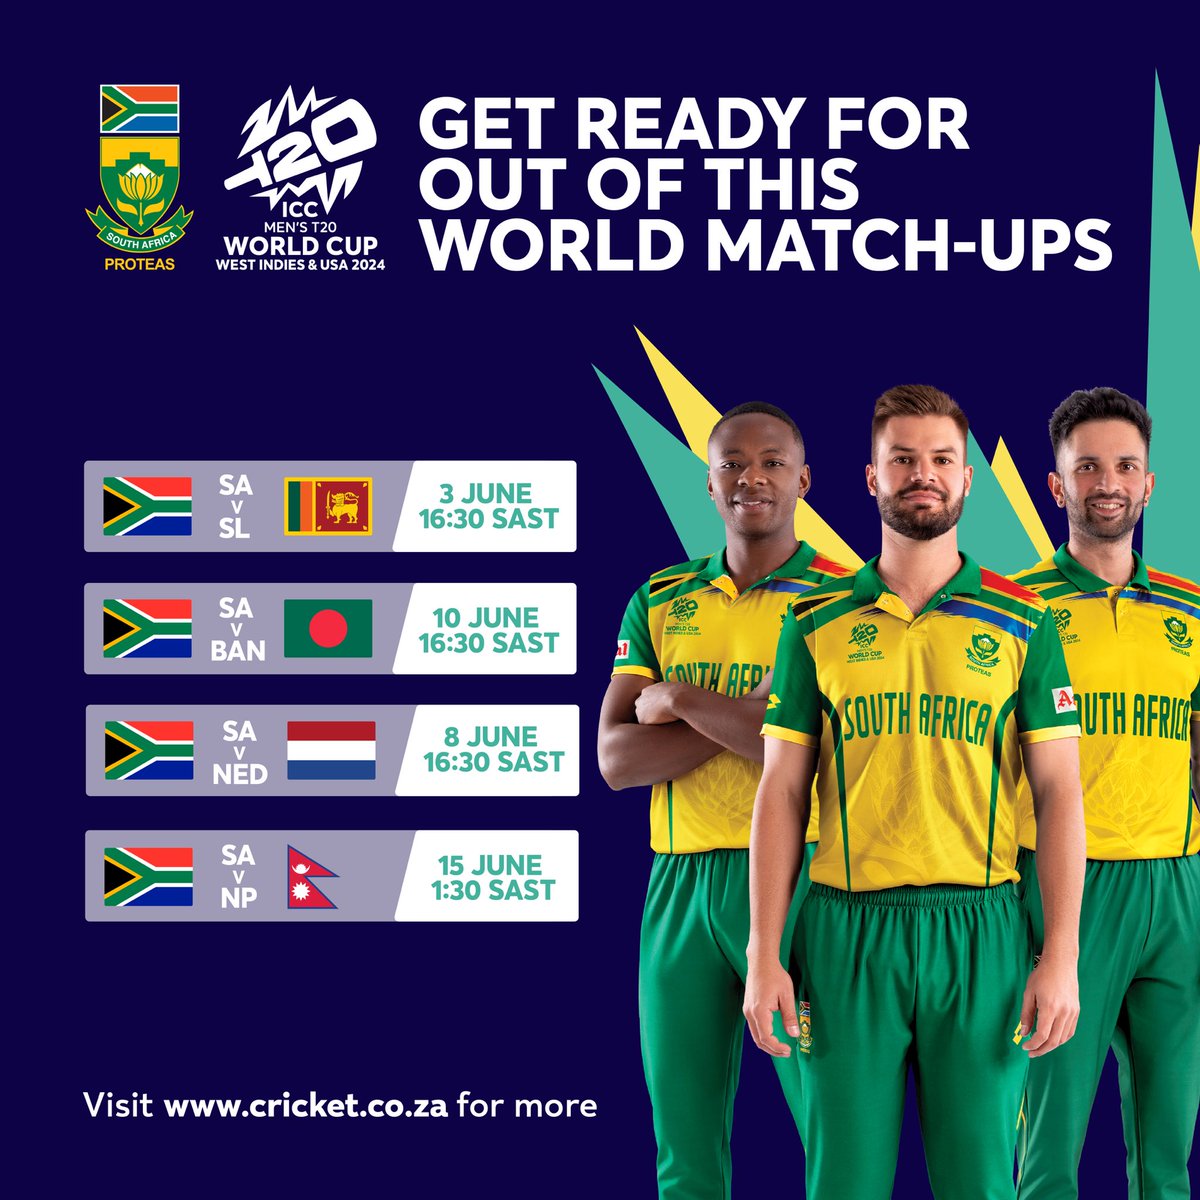 Are you ready for BIG sixes in the Big Apple? 🏏🗽 Get behind the Proteas as they gear up to showcase some out of this world performances in this year’s ICC #T20WorldCup. 🇿🇦🌍 Watch the action-packed matches LIVE on SuperSport. #OutOfThisWorld #BePartOfIt #WozaNawe